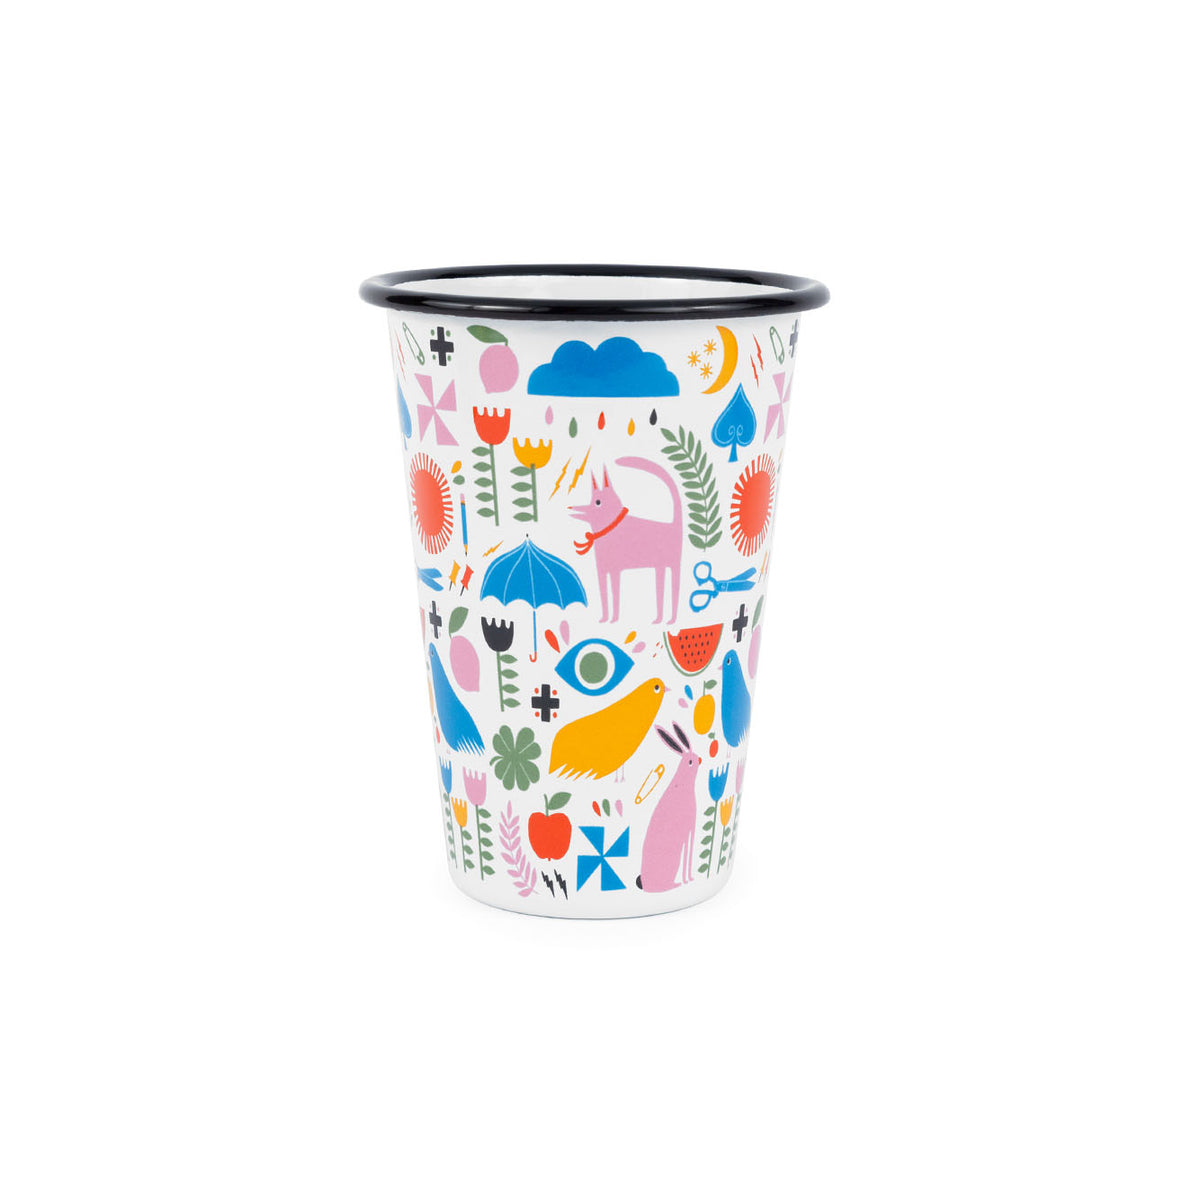 Pink Dog Tumbler by Lisa Congdon. Illustration of pink dog with other animals, weather, plants, etc...